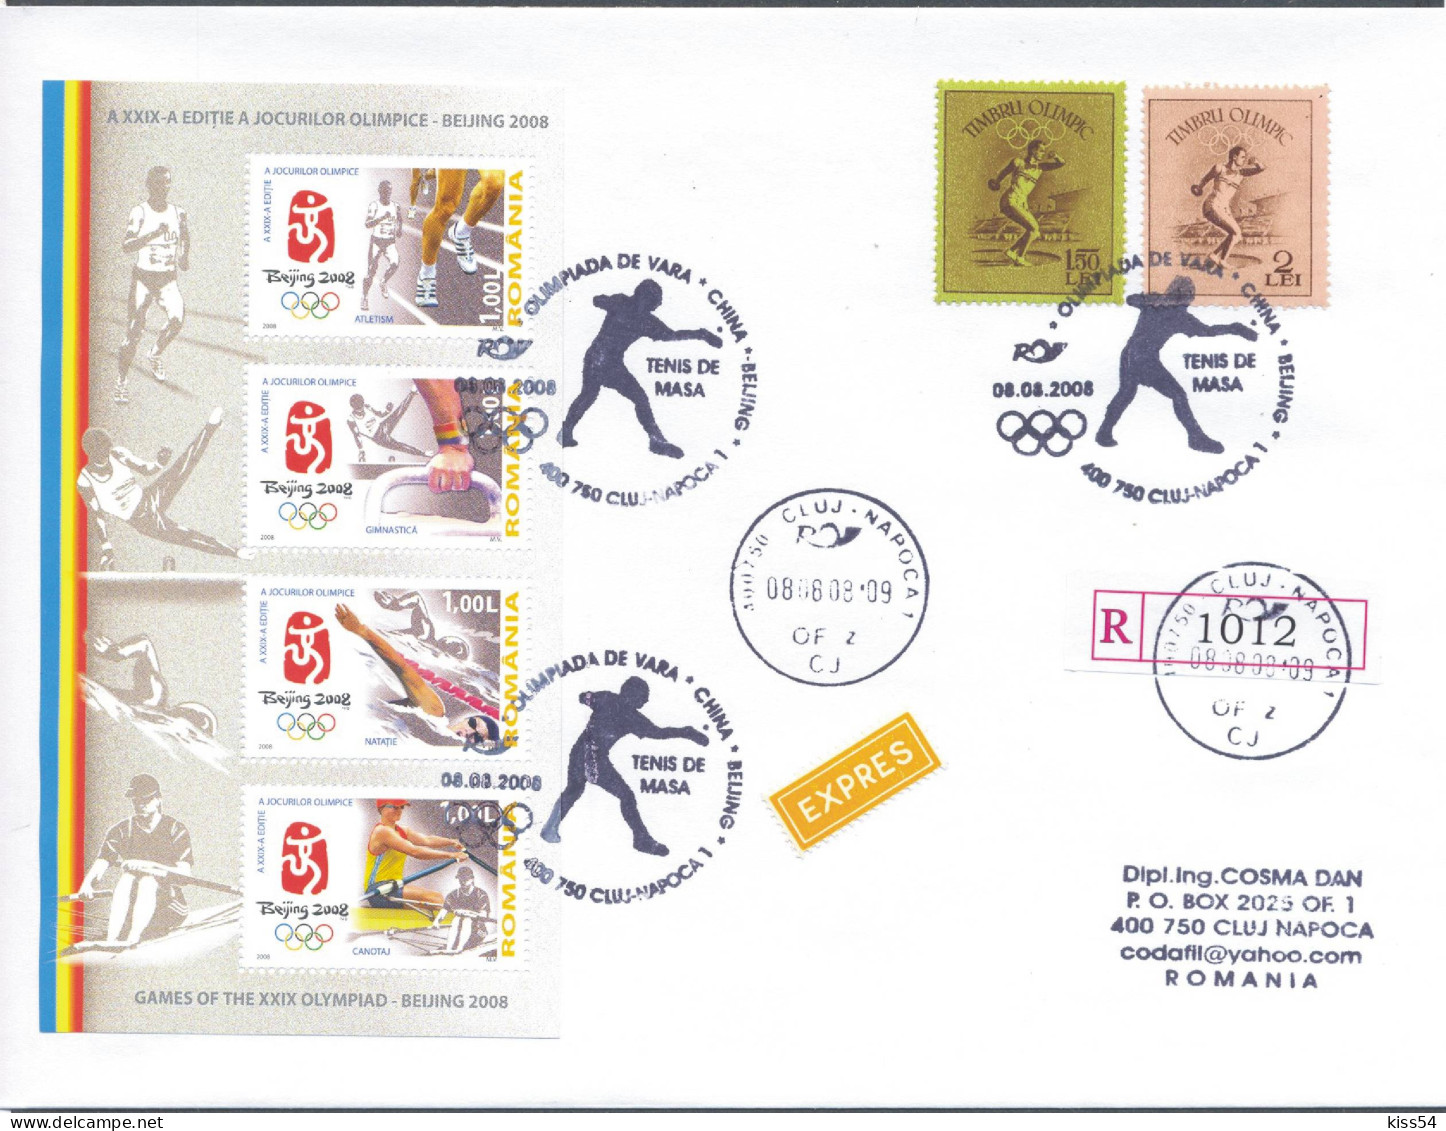 CV 89 - 469 TABLE TENNIS, Olimpic Games Beijing, China-Romania - Cover - Used - 2008 - Tischtennis